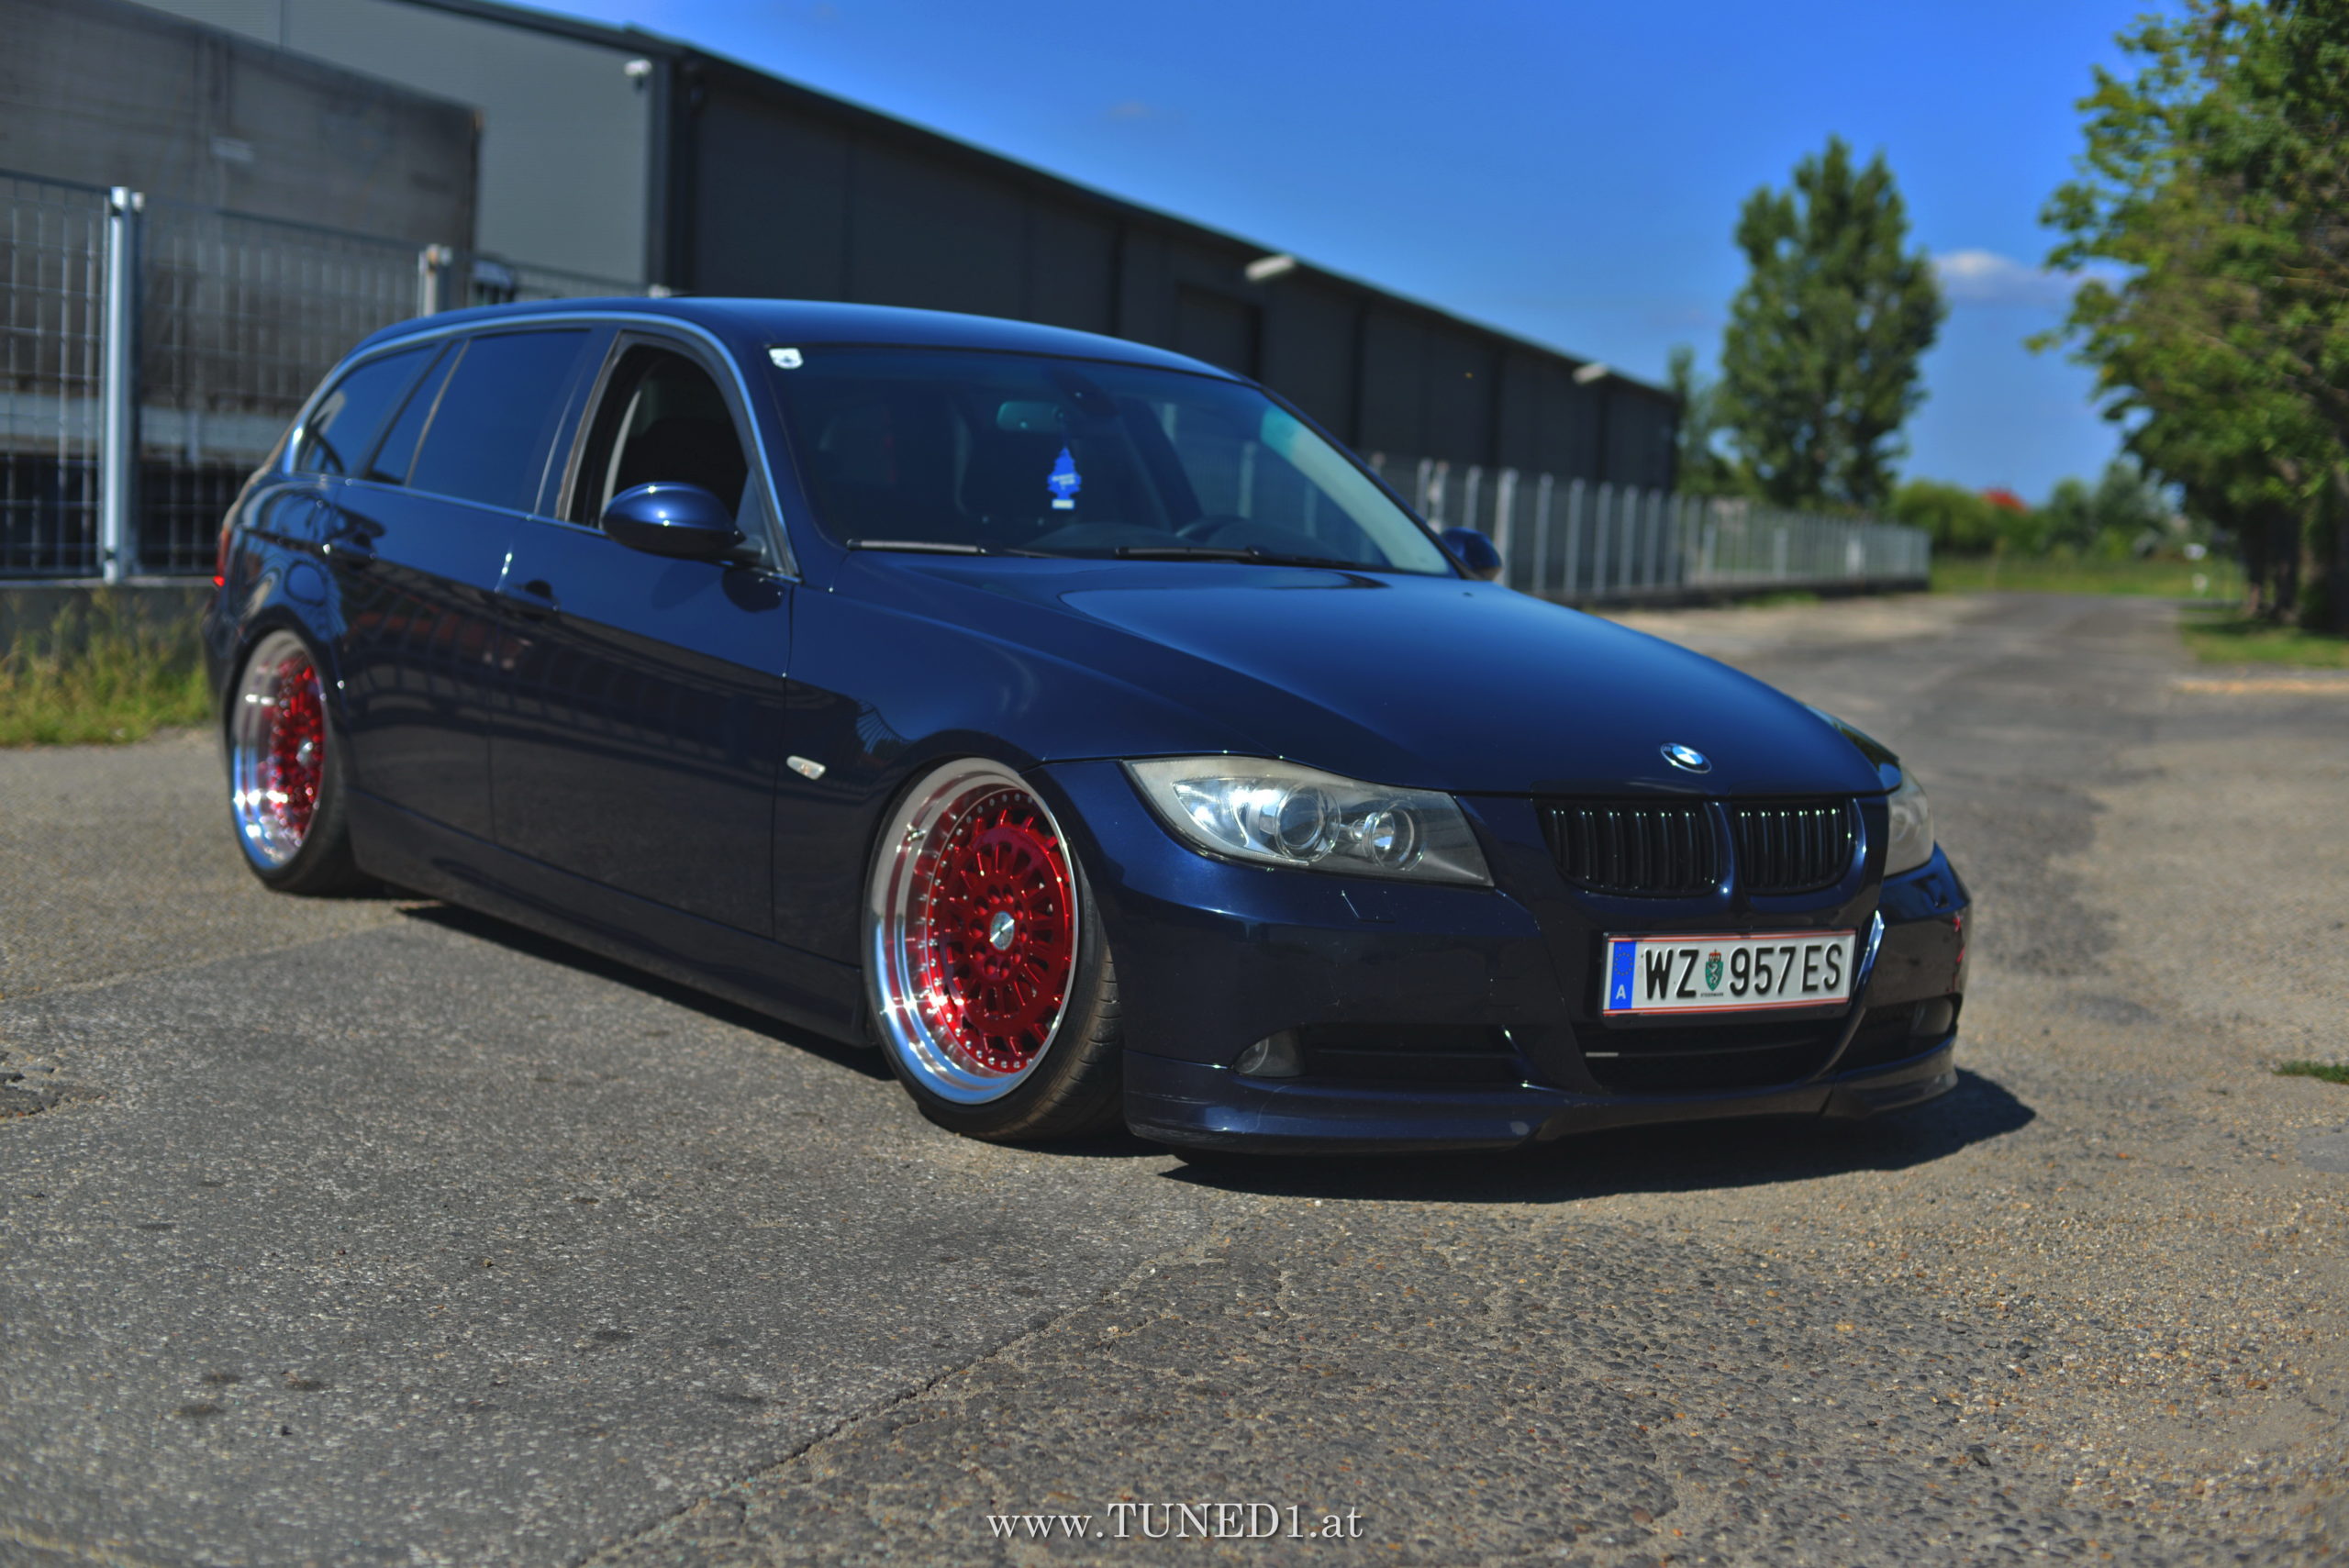 https://www.tuned1.at/wp-content/uploads/2020/08/bmw_e91_stance_bagged_lena_02-scaled.jpg